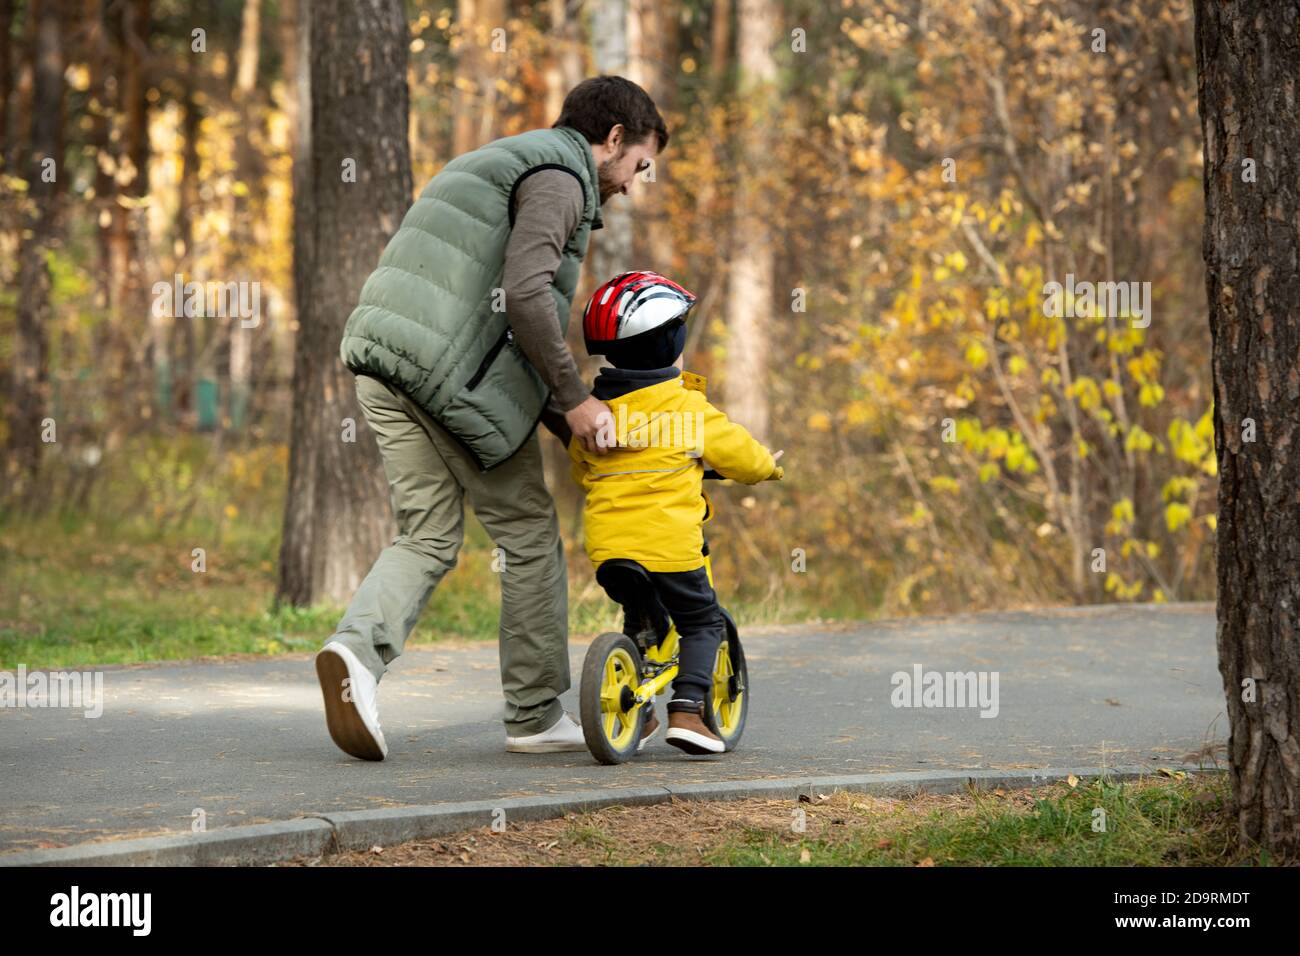 Rear view of young man running after his active little son riding balance bike Stock Photo